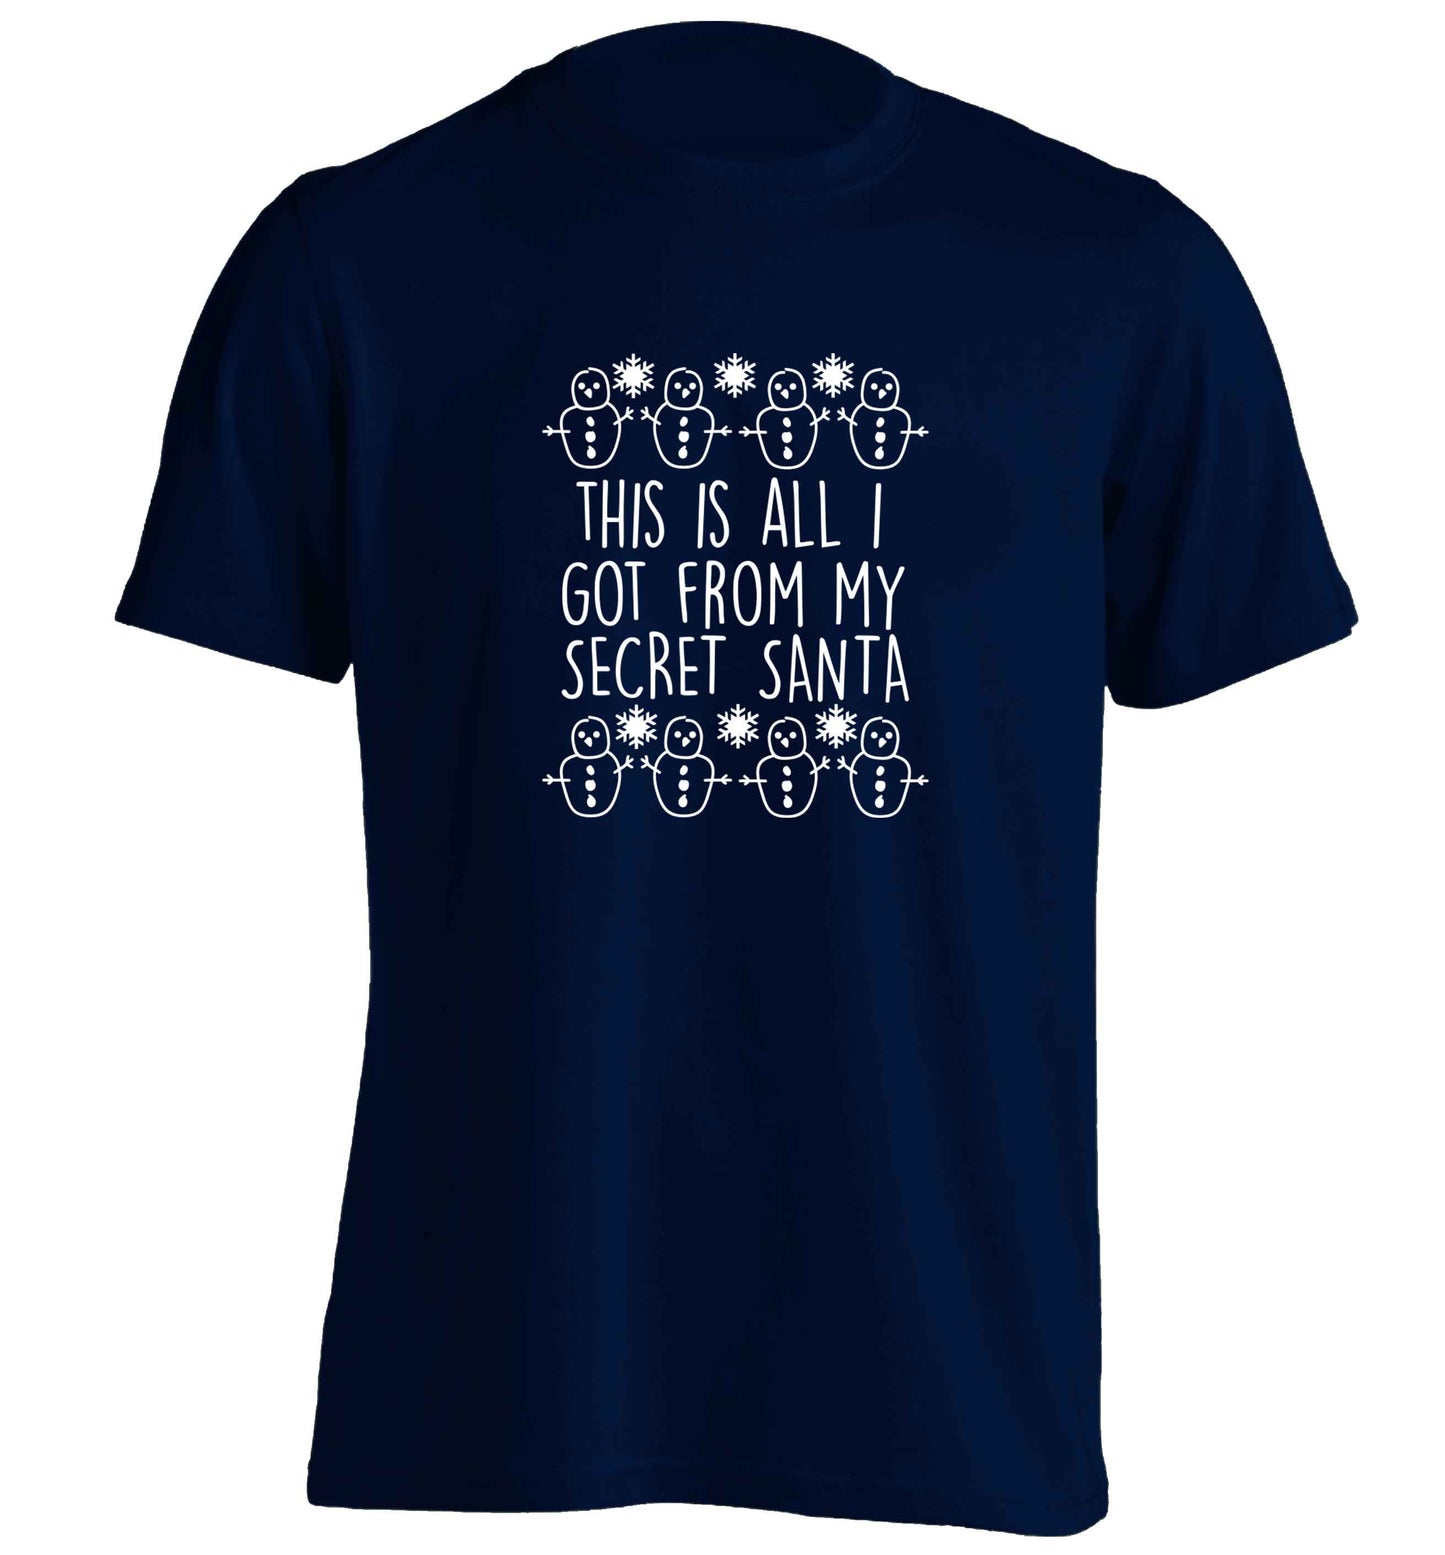 This is all I got from my secret Santa adults unisex navy Tshirt 2XL